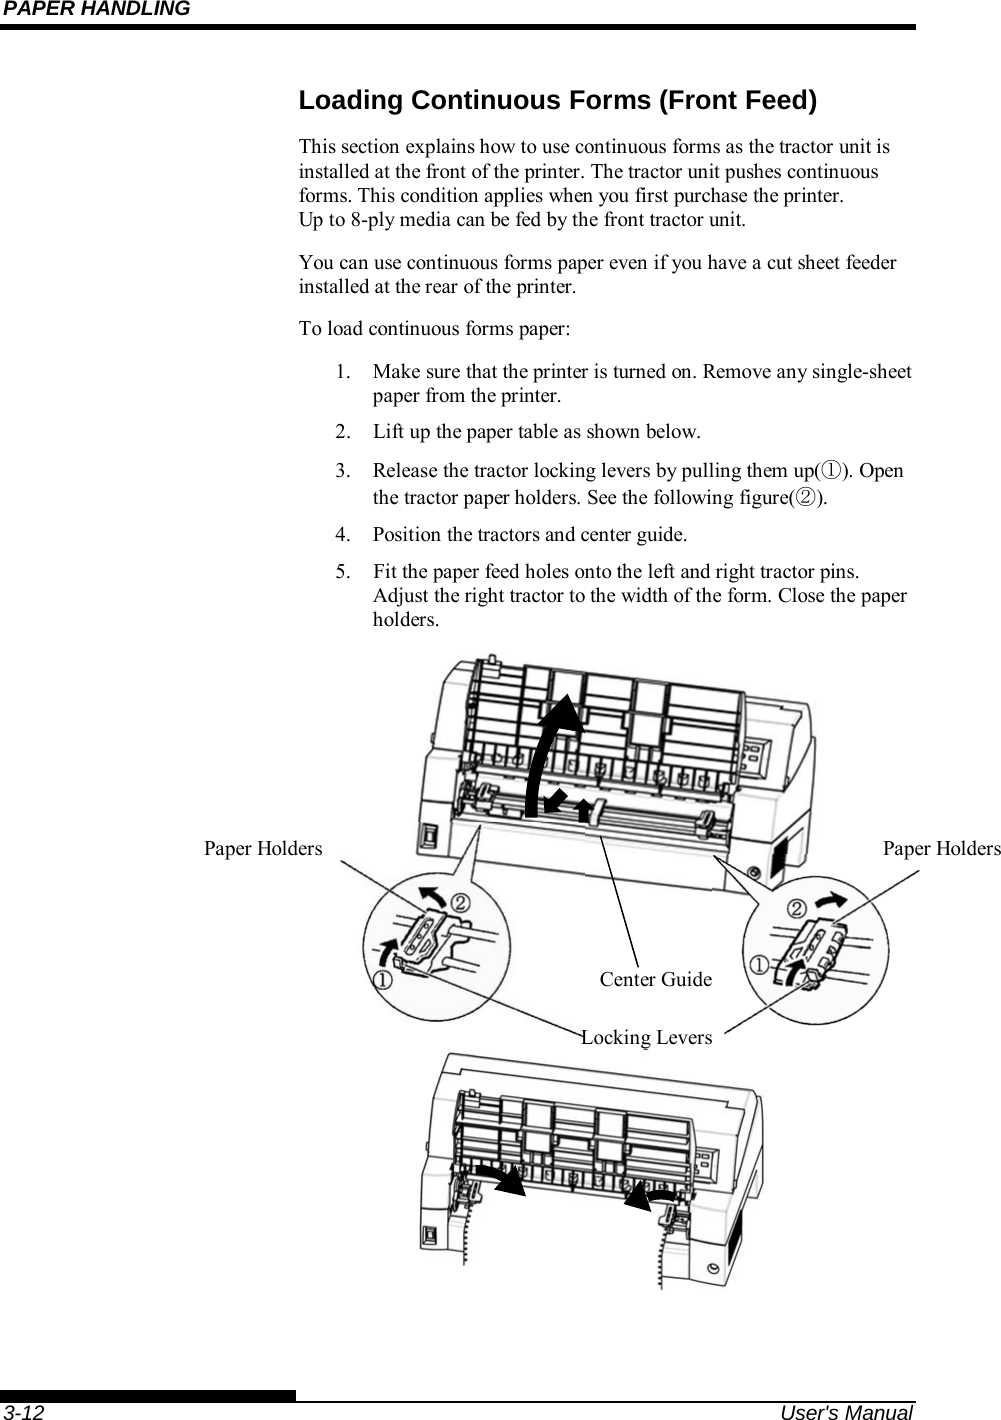 PAPER HANDLING    3-12  User&apos;s Manual Loading Continuous Forms (Front Feed) This section explains how to use continuous forms as the tractor unit is installed at the front of the printer. The tractor unit pushes continuous forms. This condition applies when you first purchase the printer. Up to 8-ply media can be fed by the front tractor unit. You can use continuous forms paper even if you have a cut sheet feeder installed at the rear of the printer. To load continuous forms paper: 1.  Make sure that the printer is turned on. Remove any single-sheet paper from the printer. 2.  Lift up the paper table as shown below. 3.  Release the tractor locking levers by pulling them up(①). Open the tractor paper holders. See the following figure(②). 4.  Position the tractors and center guide. 5.    Fit the paper feed holes onto the left and right tractor pins.  Adjust the right tractor to the width of the form. Close the paper holders.                       Paper Holders  Paper Holders Locking Levers Center Guide 